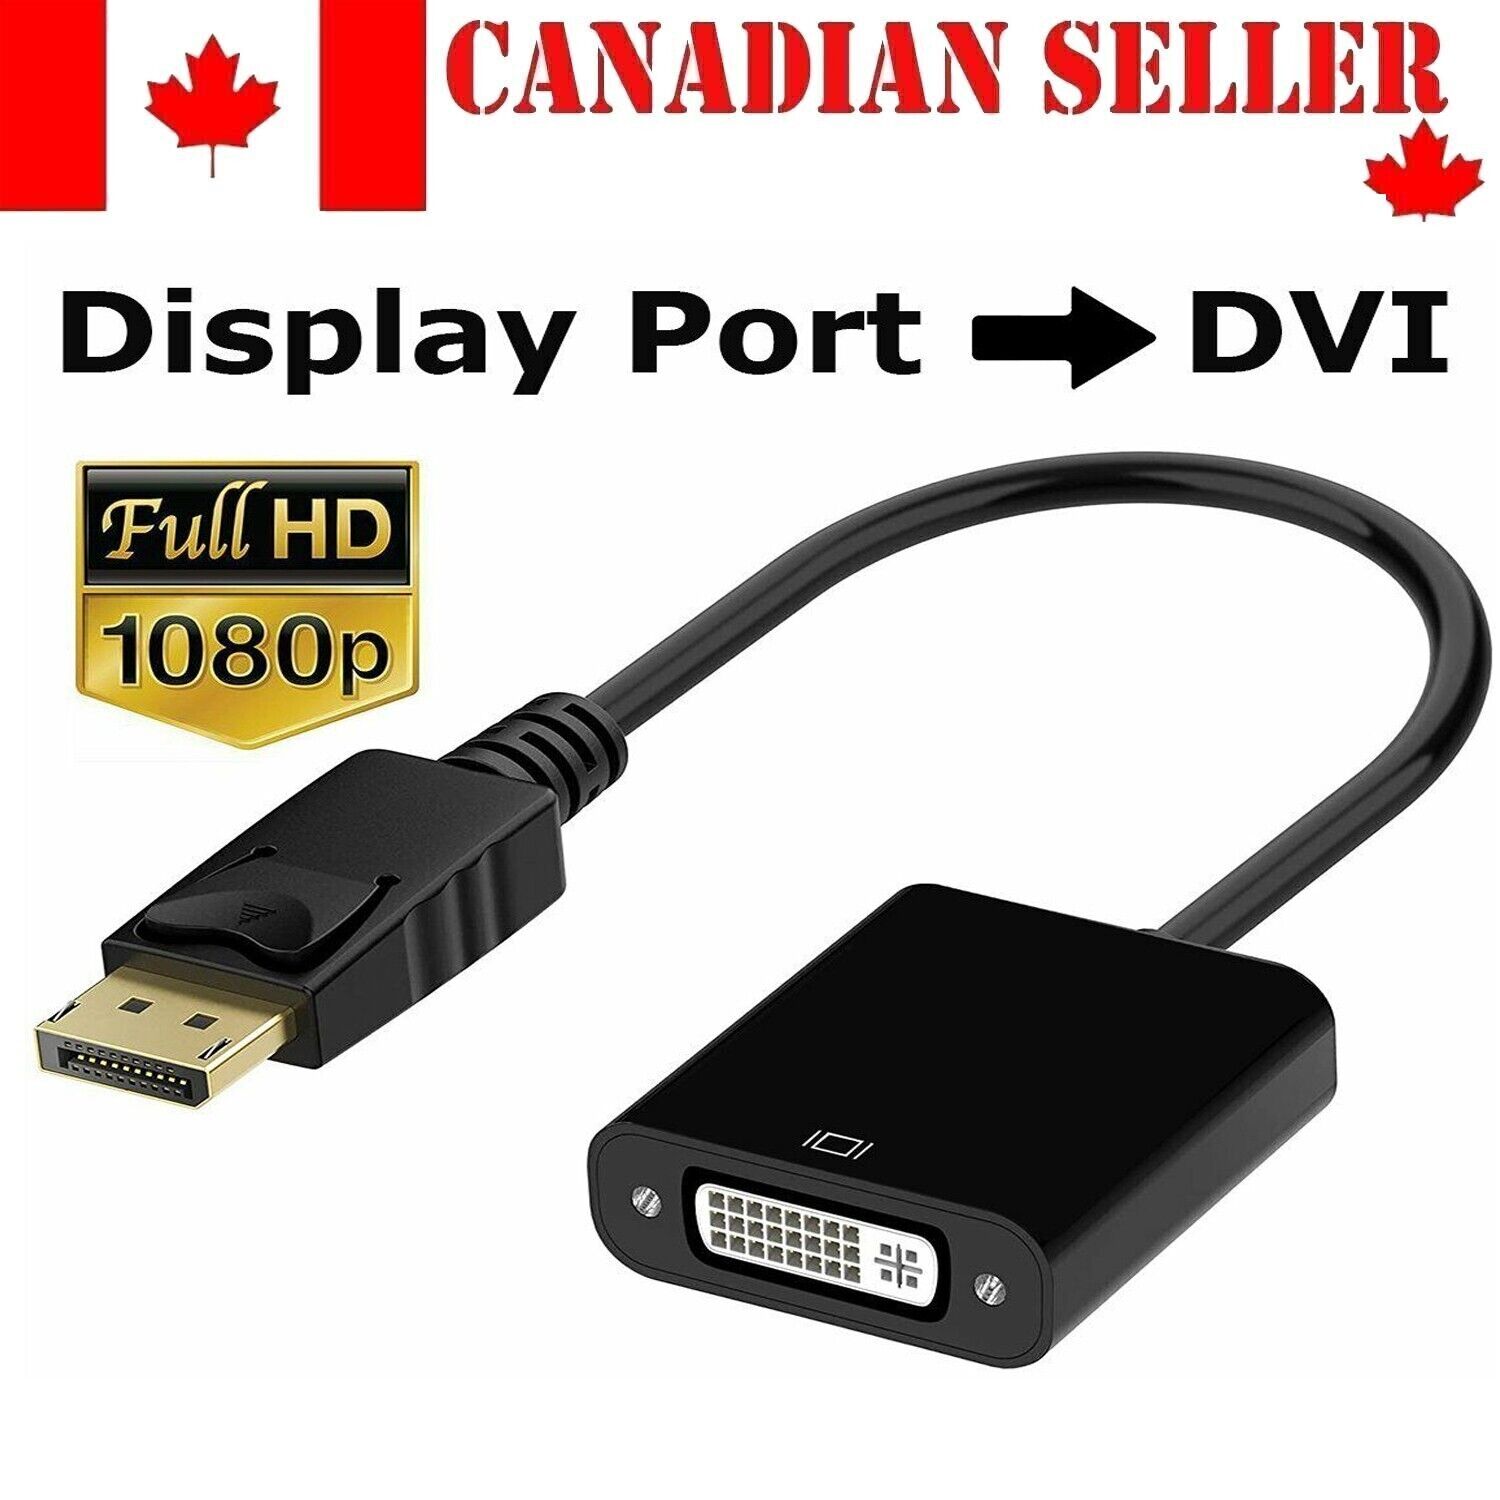 Display Port DP Male to DVI Female Display Port Adapter Cable Converter HD 1080P